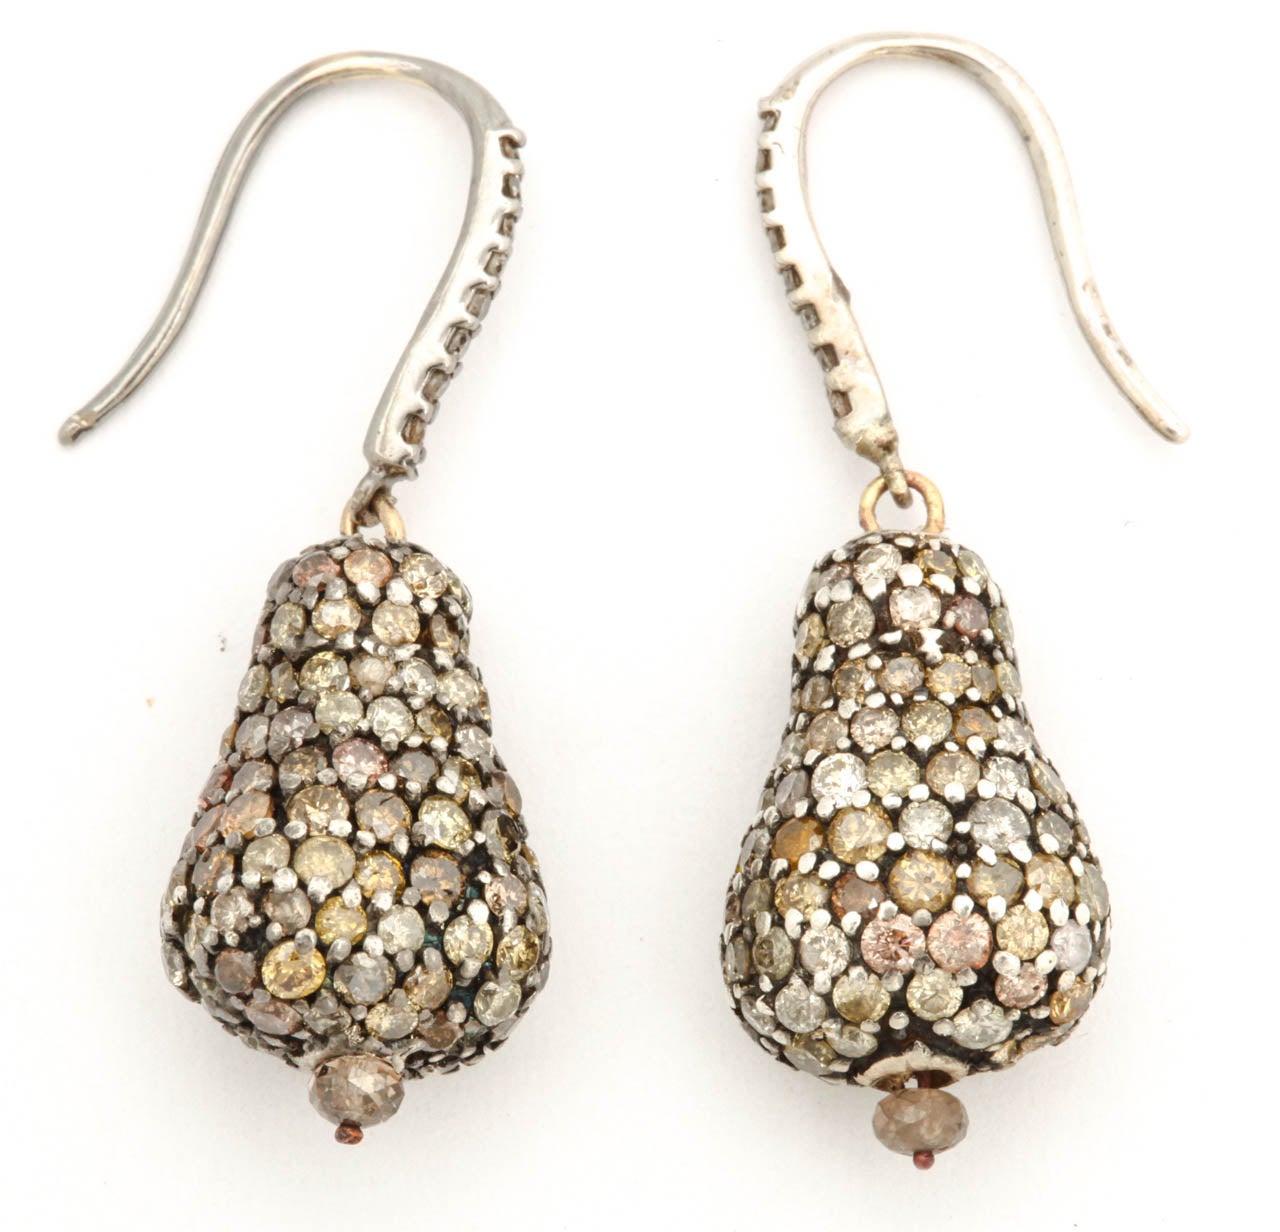 A pair of rhodium plated 18kt yellow gold, sterling silver and diamond pear earrings. The earrings are set with approximately 6.78cts of fancy colored diamonds.
Length: 1.20 inches
Length of pear: .75 inch